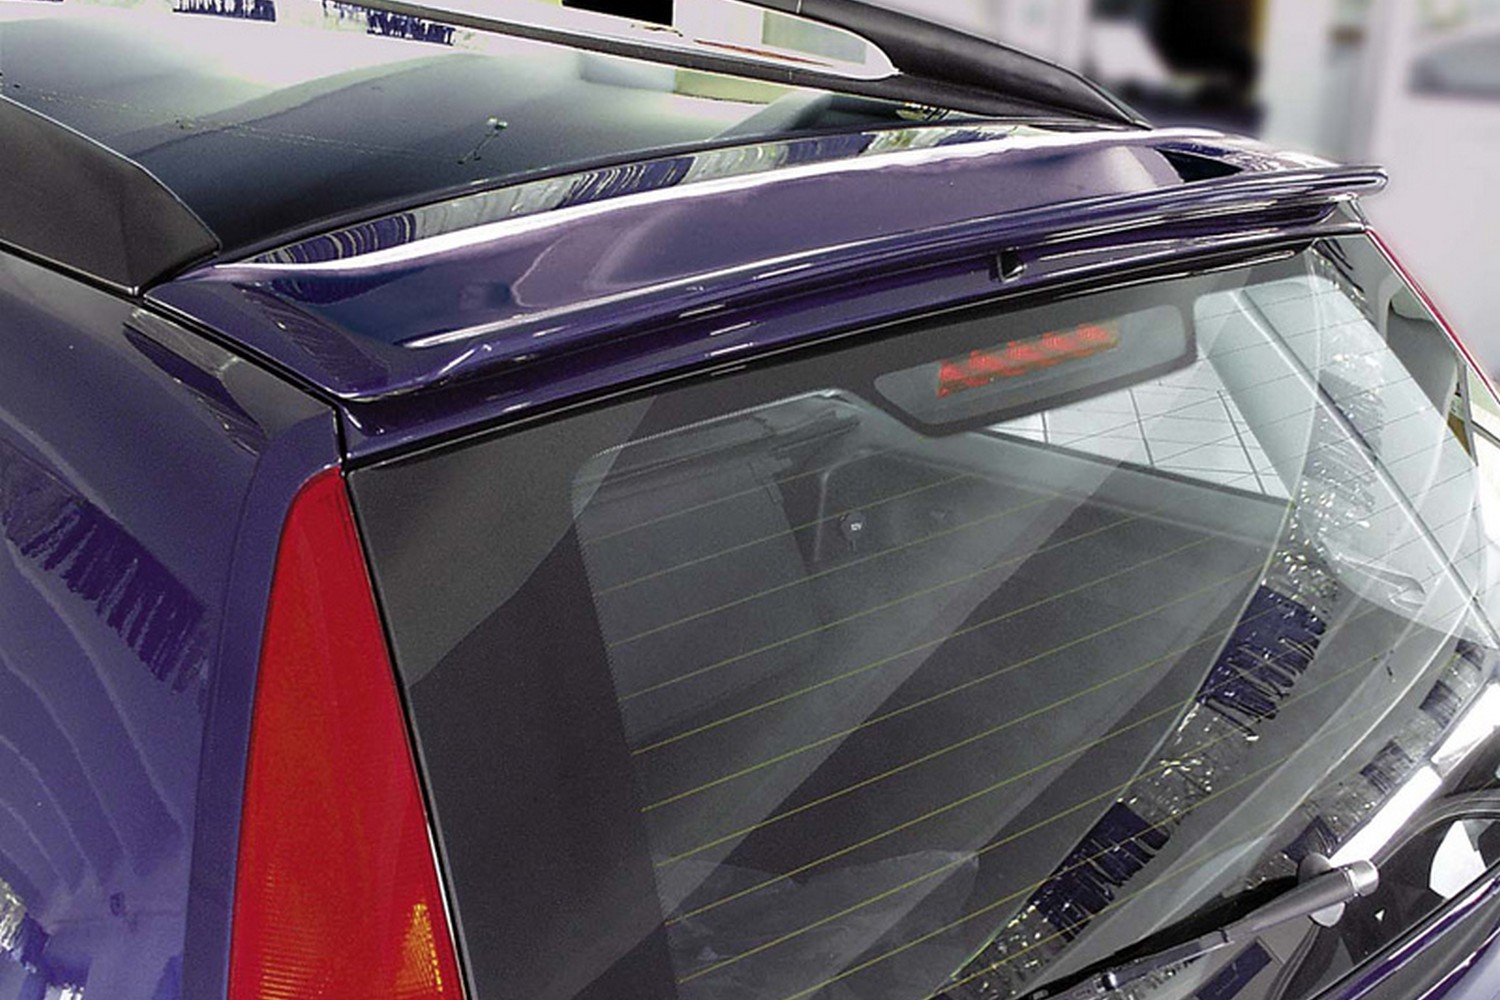 SPOILER REAR BOOT FORD MONDEO MK3 MKIII WING ACCESSORIES 2 types